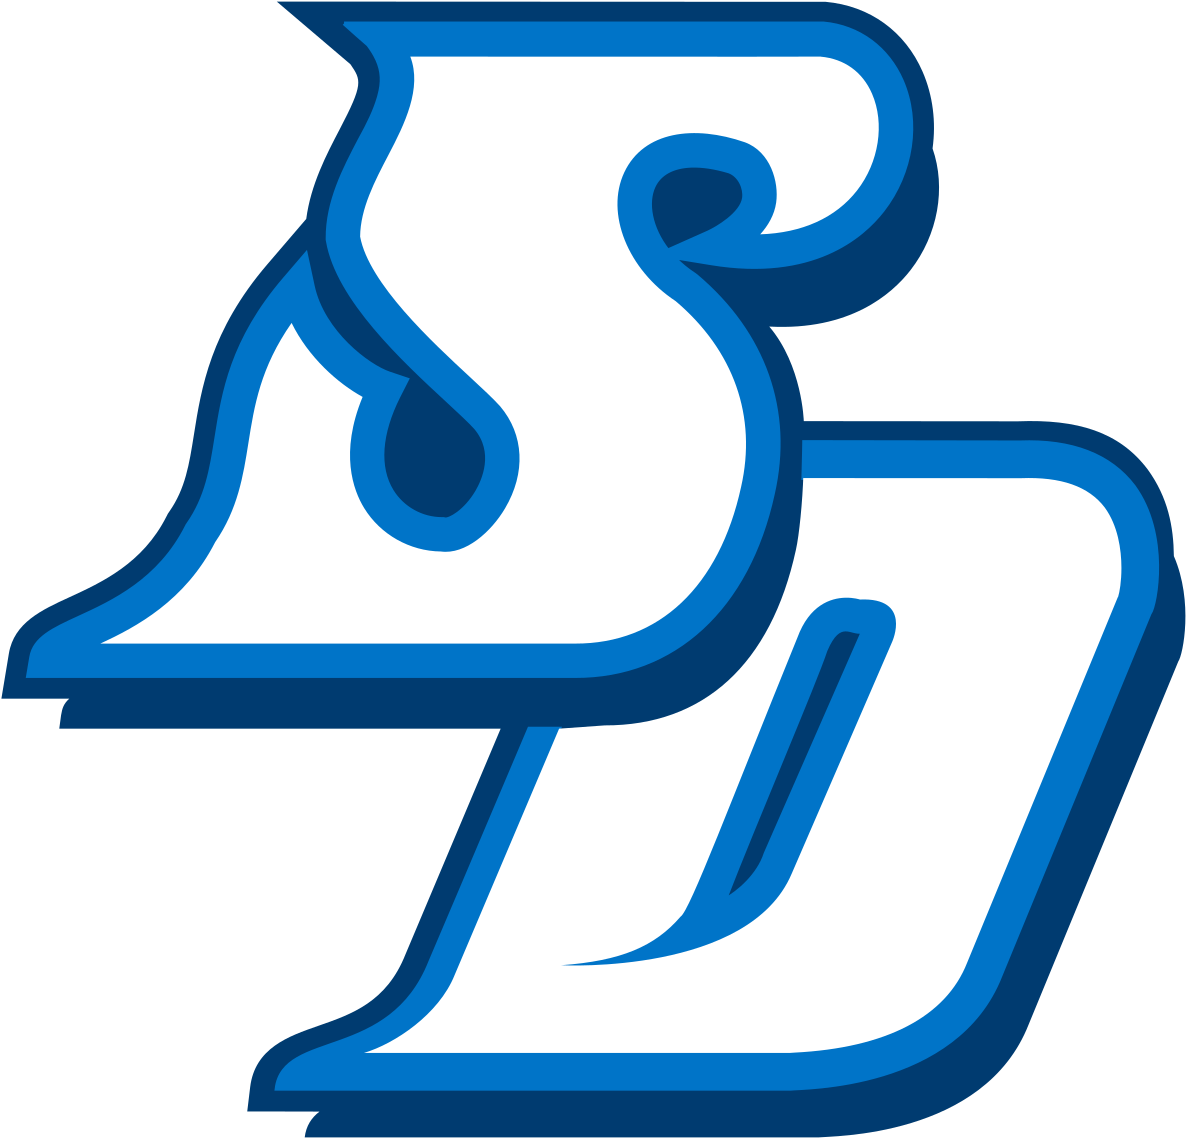 Thankful To Recieve My First Division 1 Offer To Play - University Of San Diego Toreros (1200x1152)